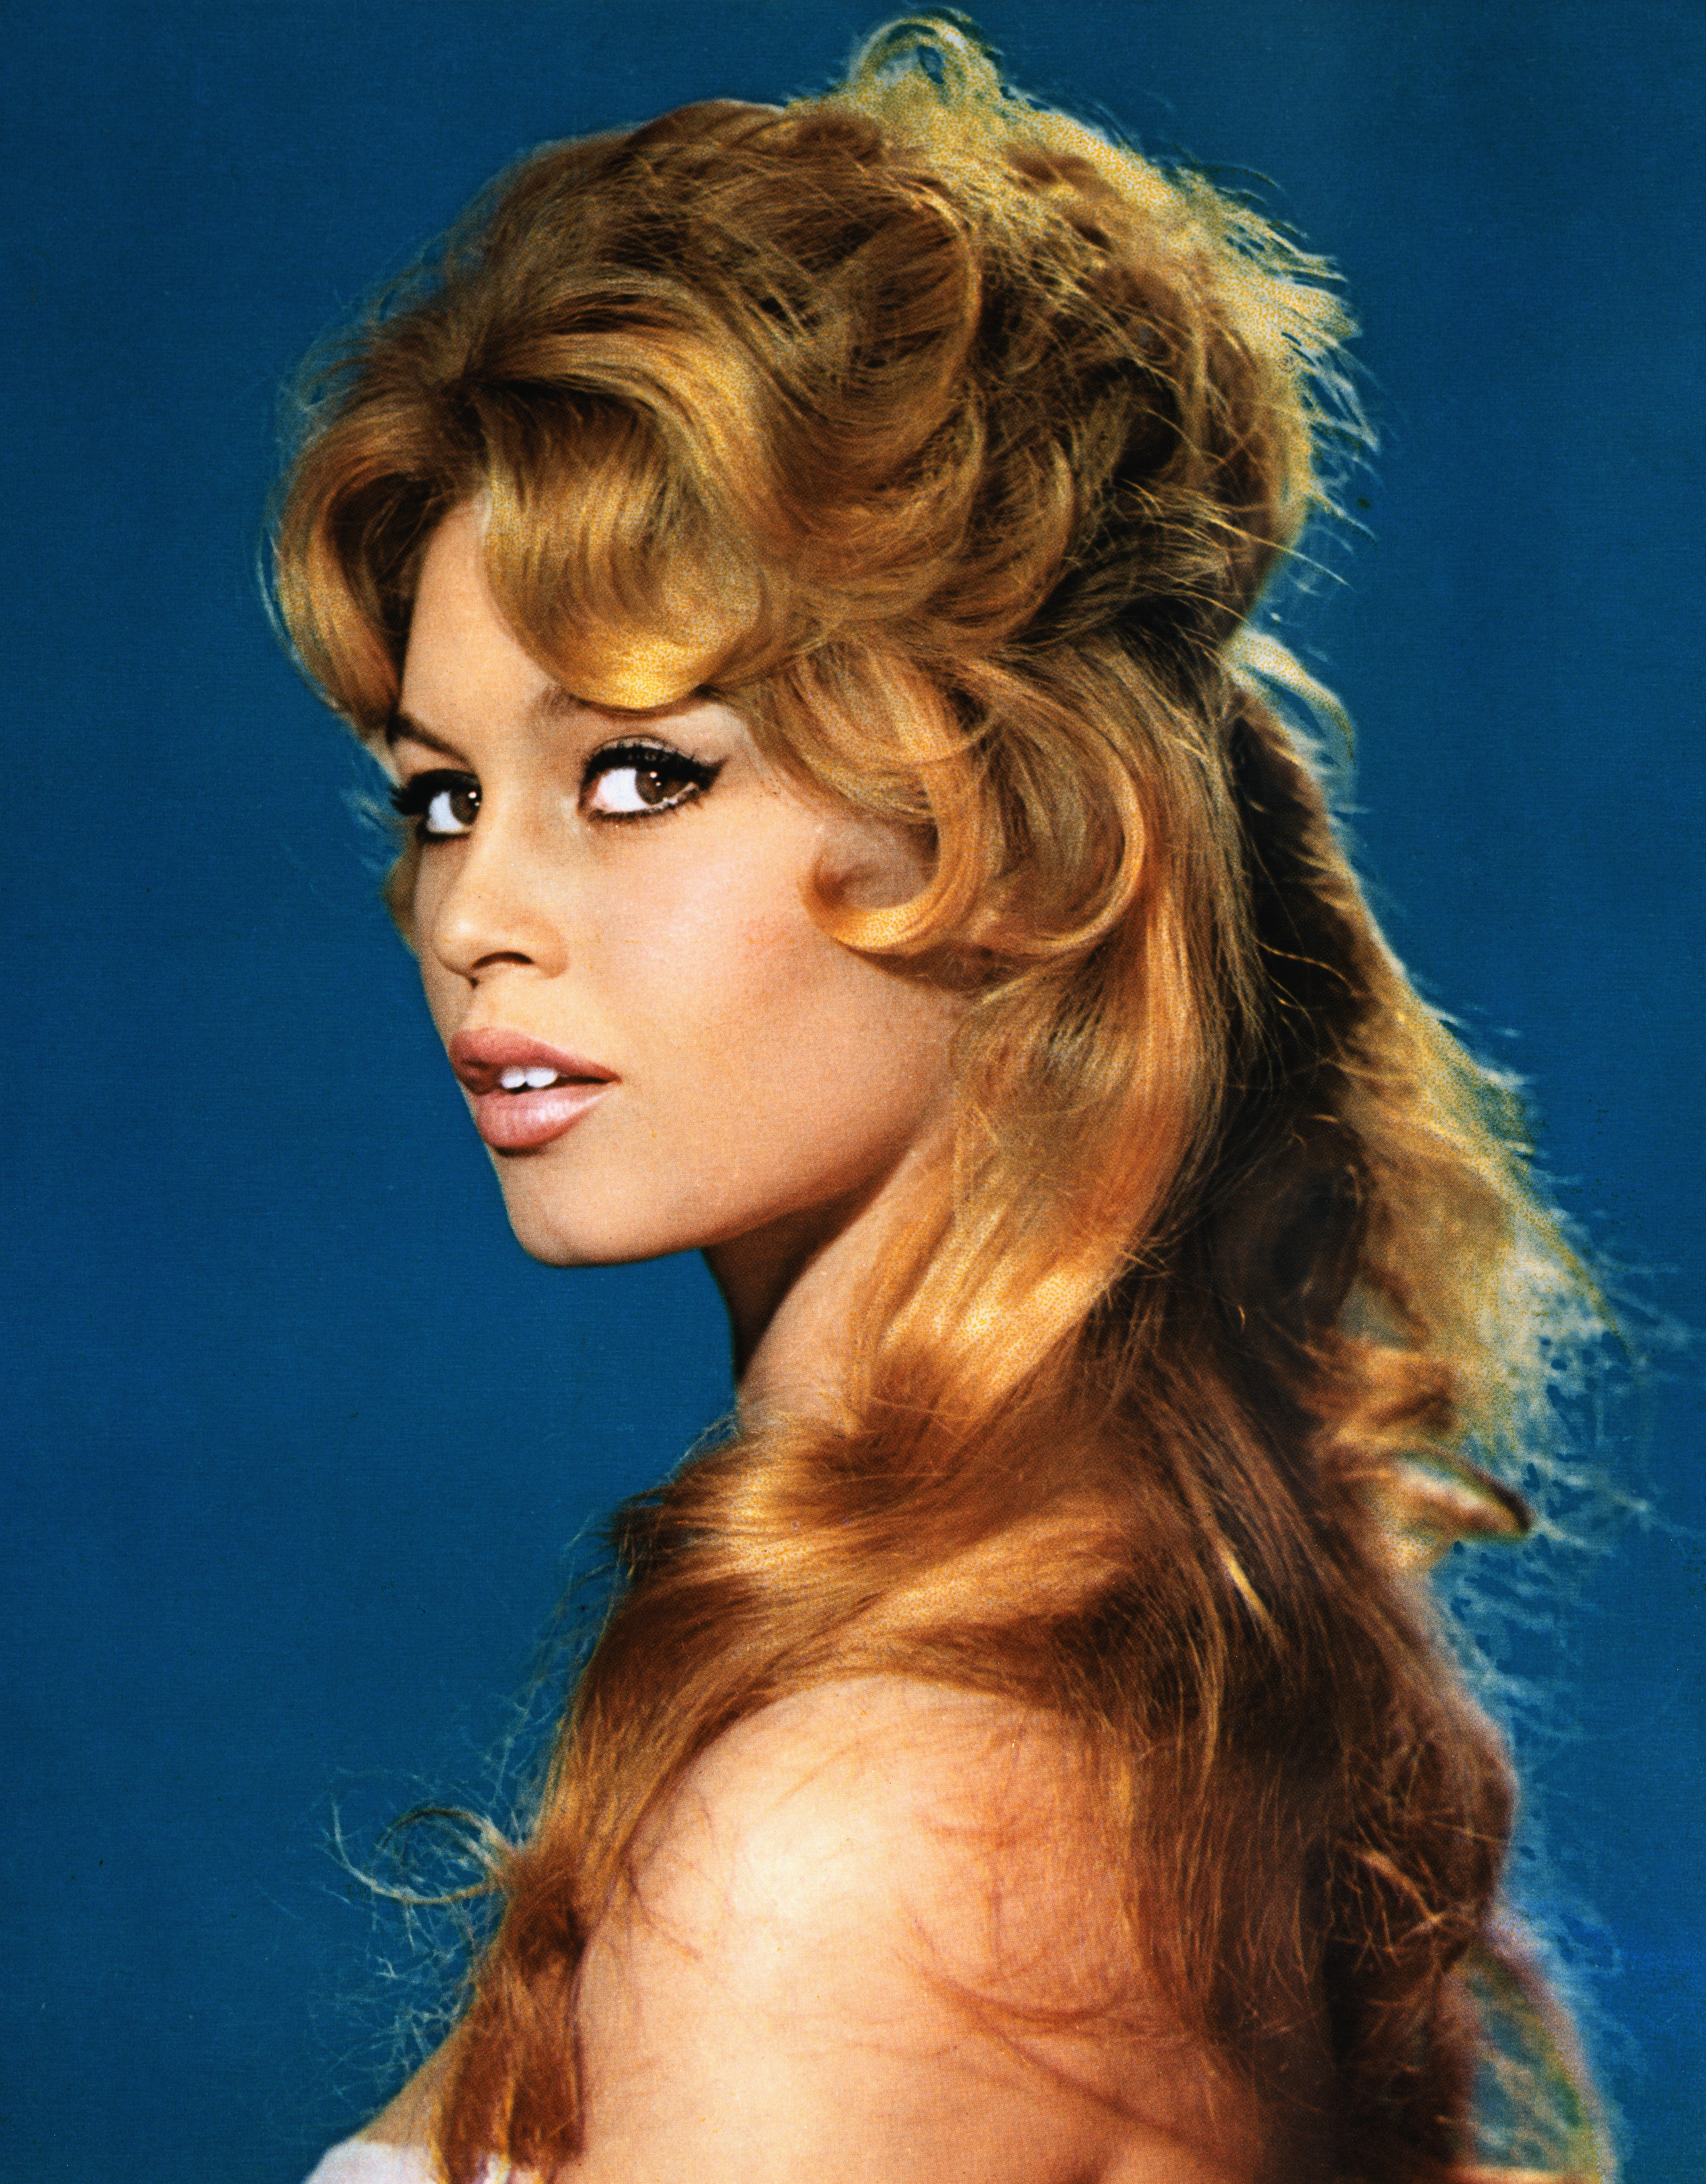 Brigitte Bardot photographed on January 1, 1950 | Source: Getty Images